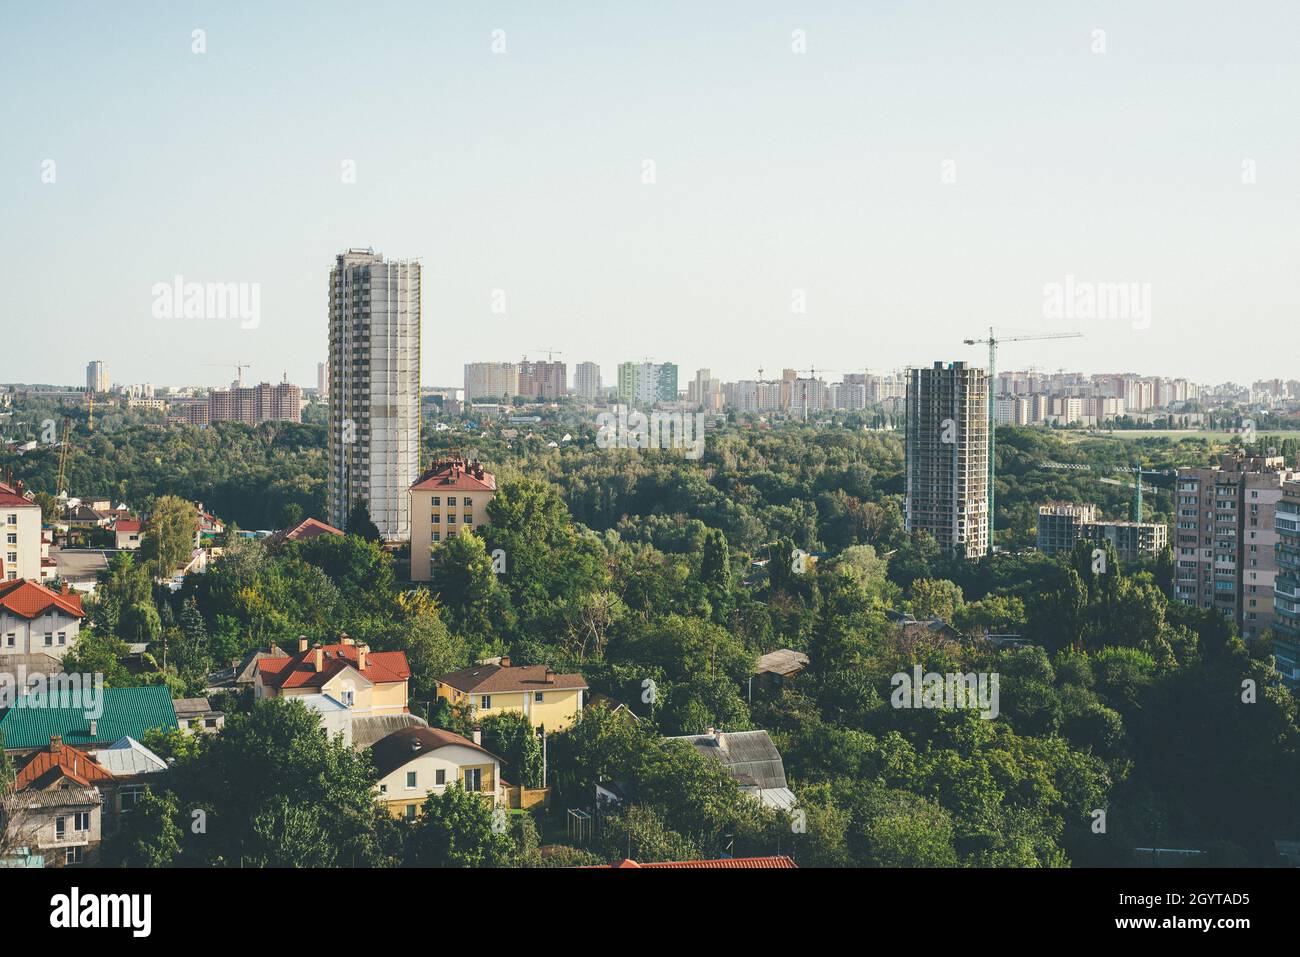 Kyiv city urbanistic lanscape of two buildins under constructions between green tree crones Stock Photo